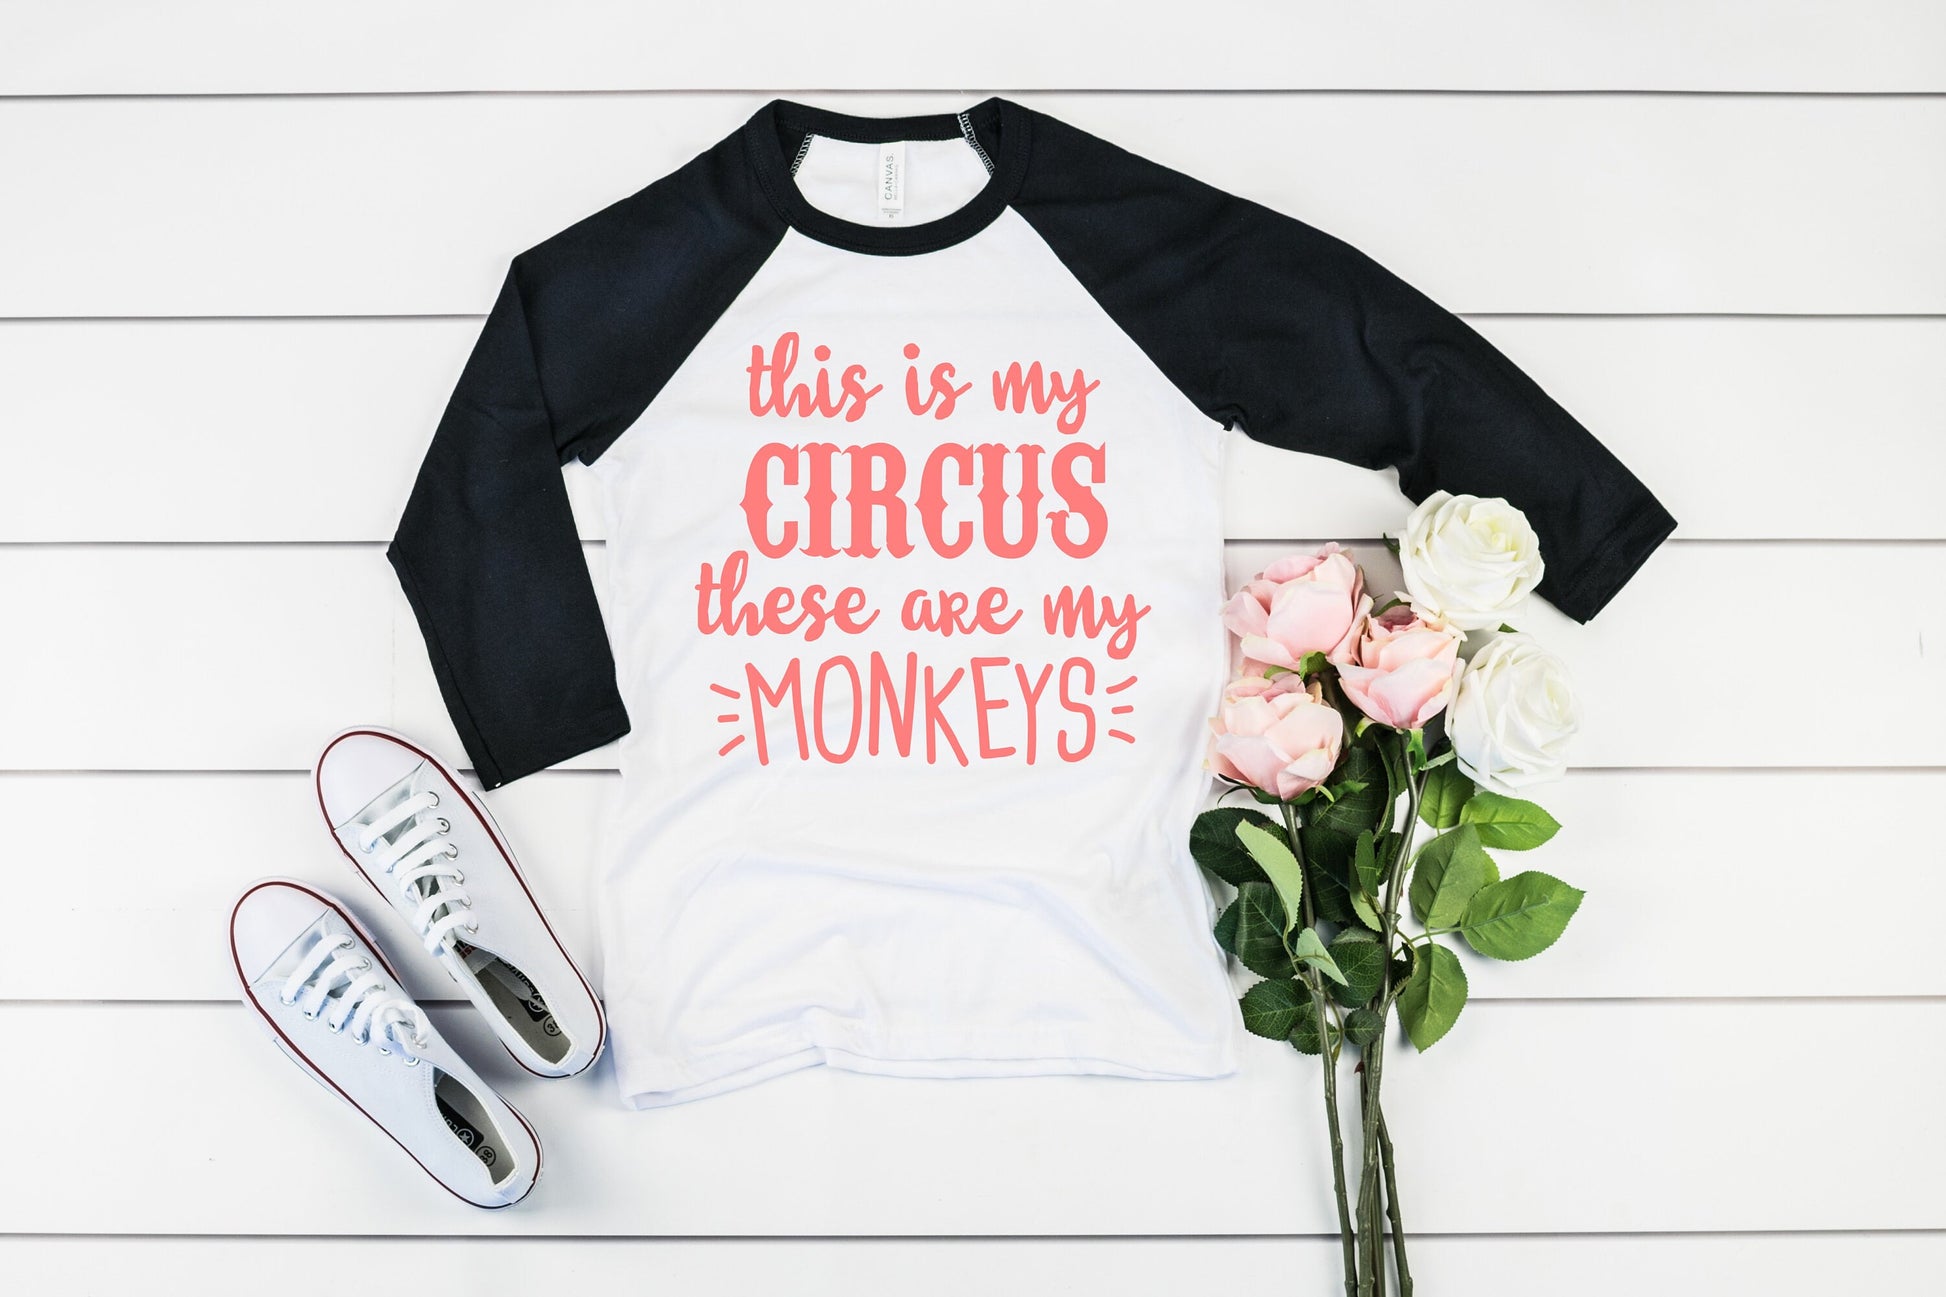 This Is My Circus and These are My Monkeys raglan t-shirt - Mom of Twins - Mom of Triplets - Mom of Multiples - Funny Mom Shirt - Mom Gift